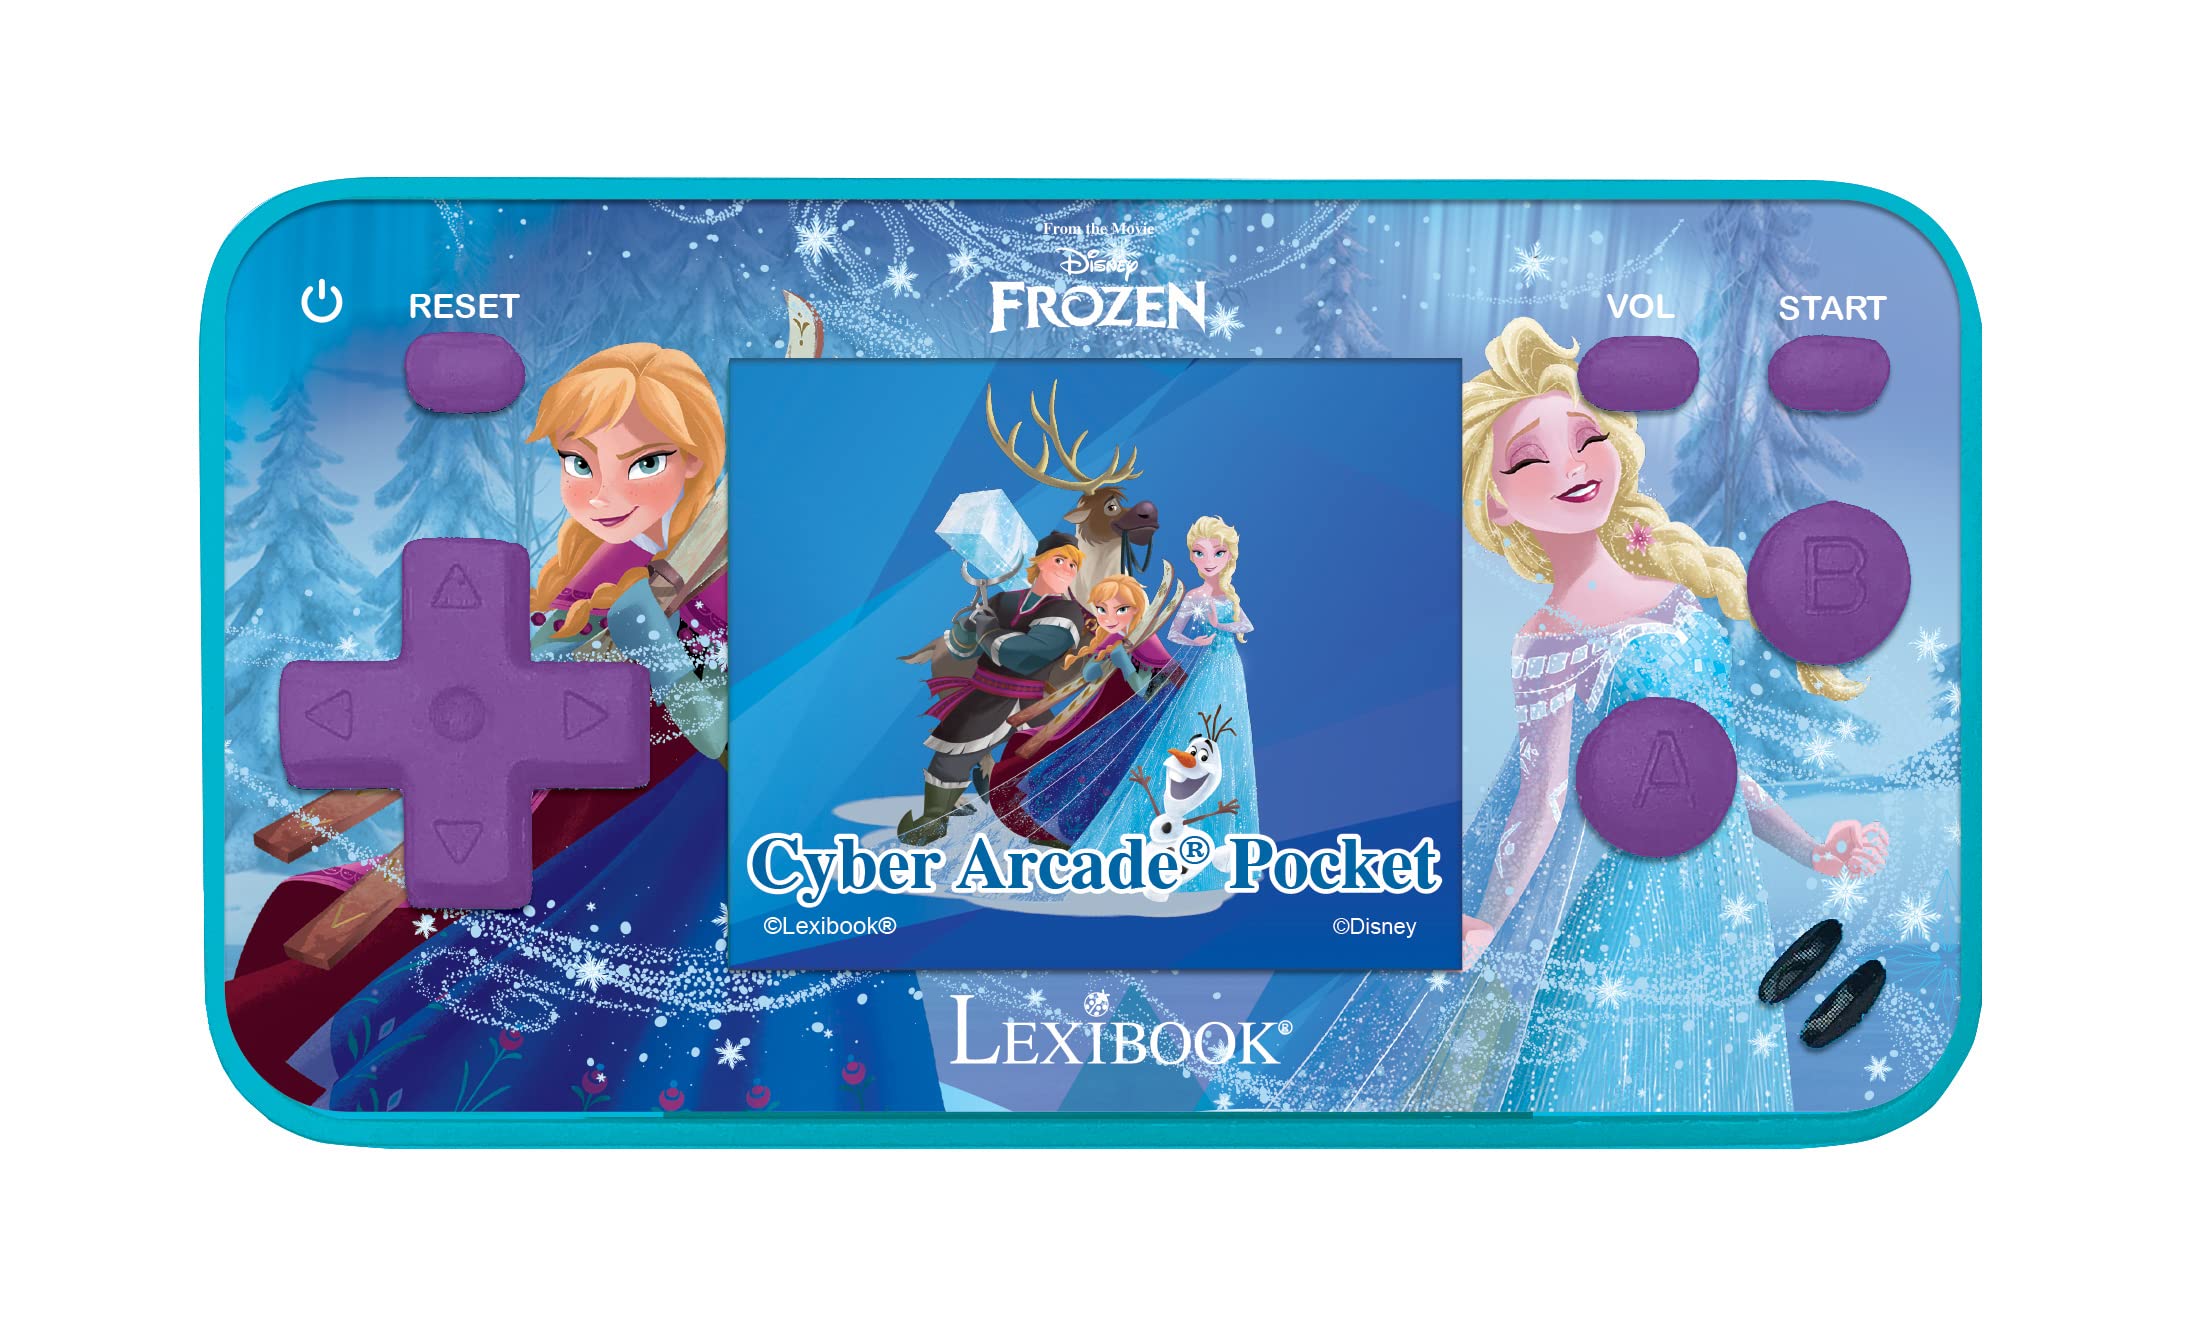 LEXiBOOK Frozen Arcade Pocket Portable Gaming Console, 150 Games, LCD, Battery Operated, Purple/Blue, JL1895FZ